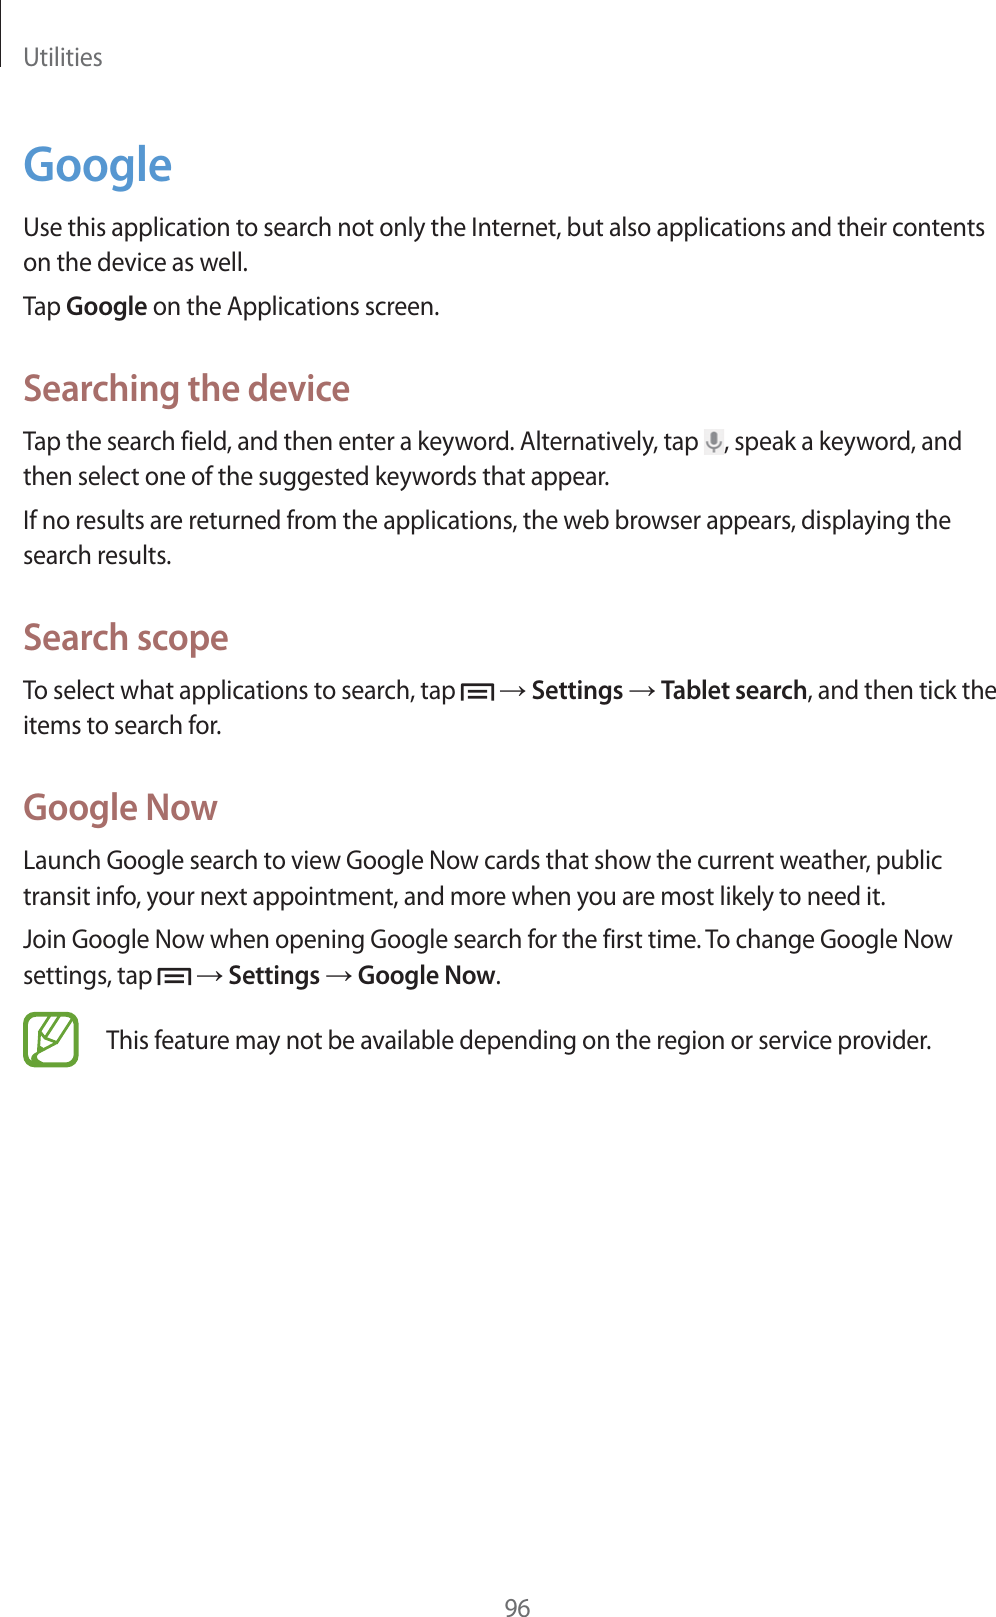 Utilities96GoogleUse this application to search not only the Internet, but also applications and their contents on the device as well.Tap Google on the Applications screen.Searching the deviceTap the search field, and then enter a keyword. Alternatively, tap  , speak a keyword, and then select one of the suggested keywords that appear.If no results are returned from the applications, the web browser appears, displaying the search results.Search scopeTo select what applications to search, tap   ĺ Settings ĺ Tablet search, and then tick the items to search for.Google NowLaunch Google search to view Google Now cards that show the current weather, public transit info, your next appointment, and more when you are most likely to need it.Join Google Now when opening Google search for the first time. To change Google Now settings, tap   ĺ Settings ĺ Google Now.This feature may not be available depending on the region or service provider.